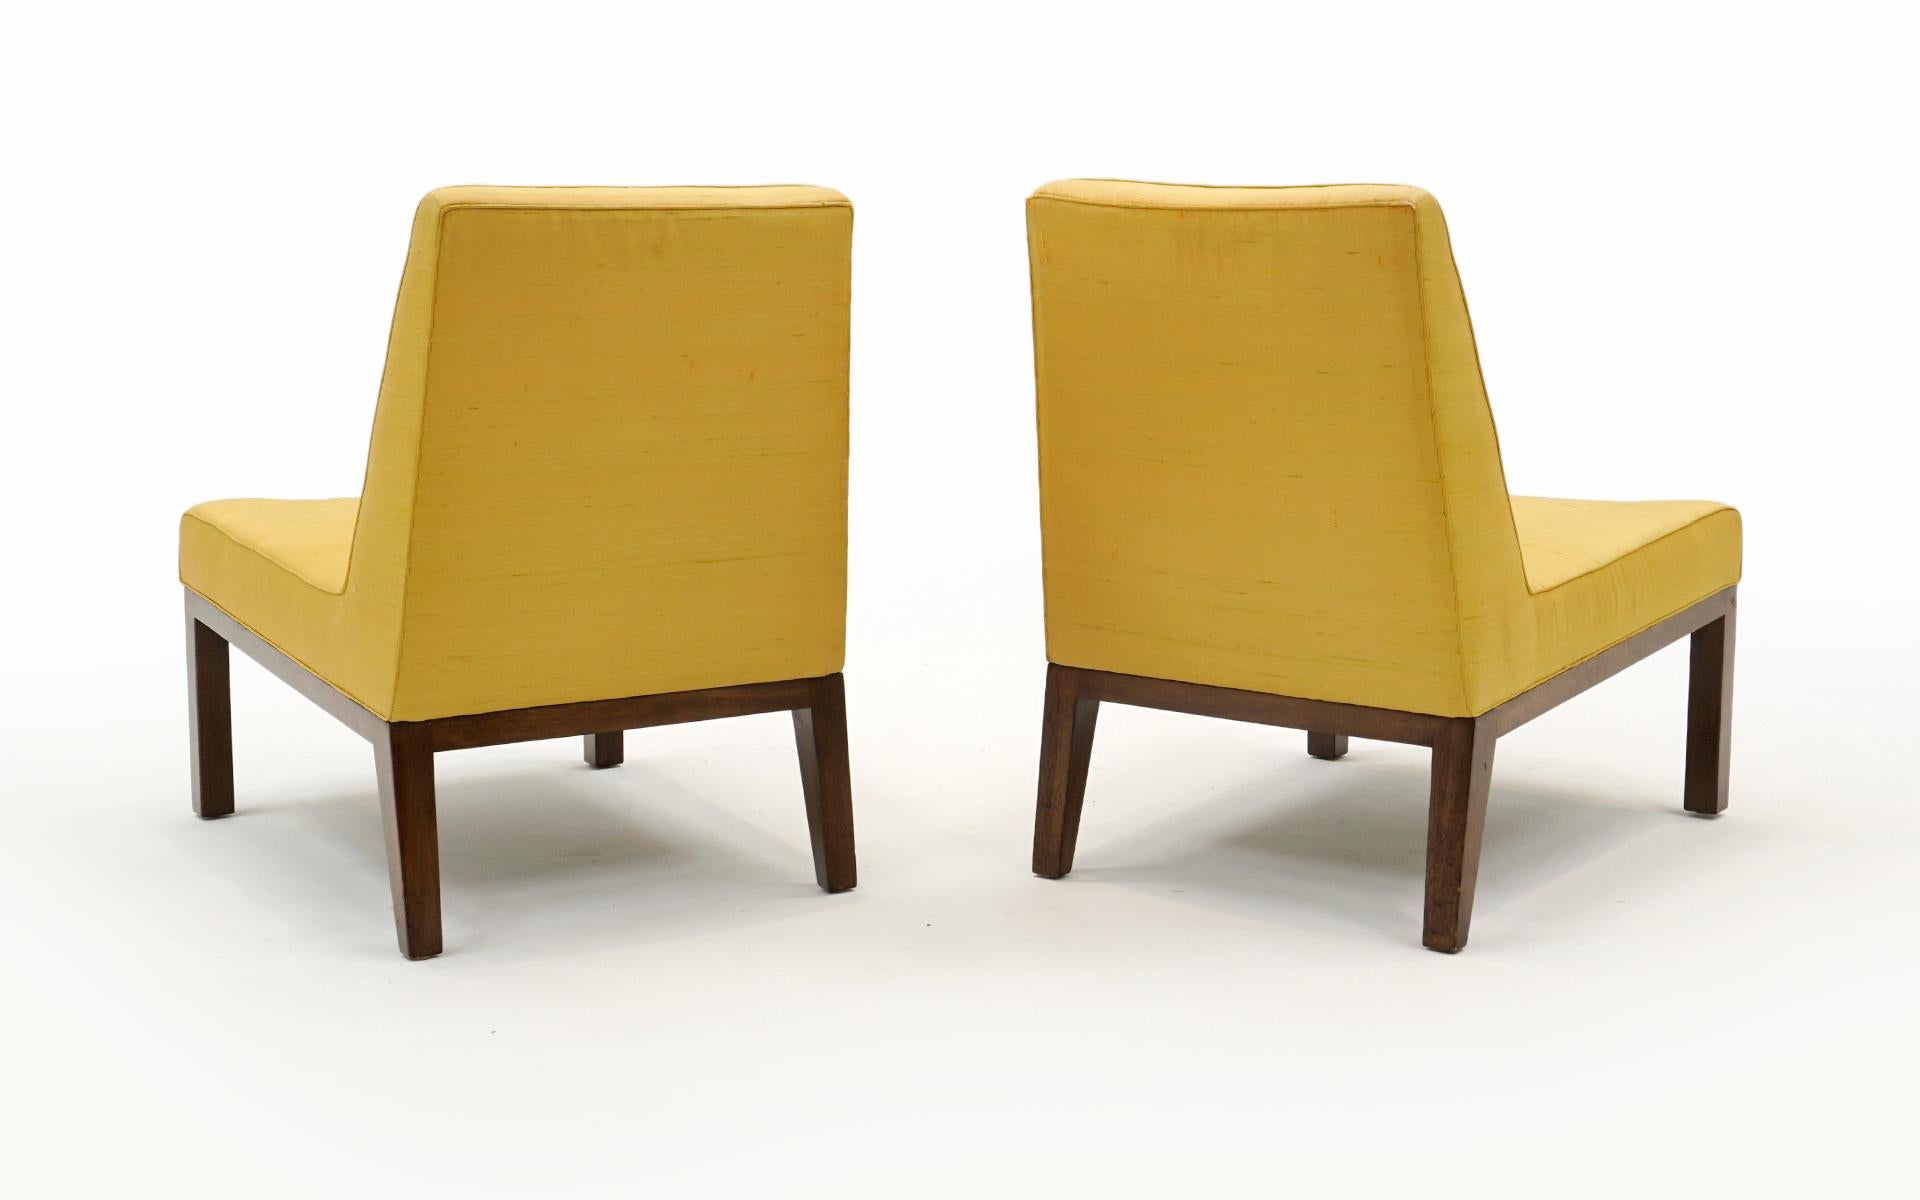 Mid-20th Century Pair Slipper Lounge Chairs by Edward Wormley for Dunbar, Original, Signed For Sale